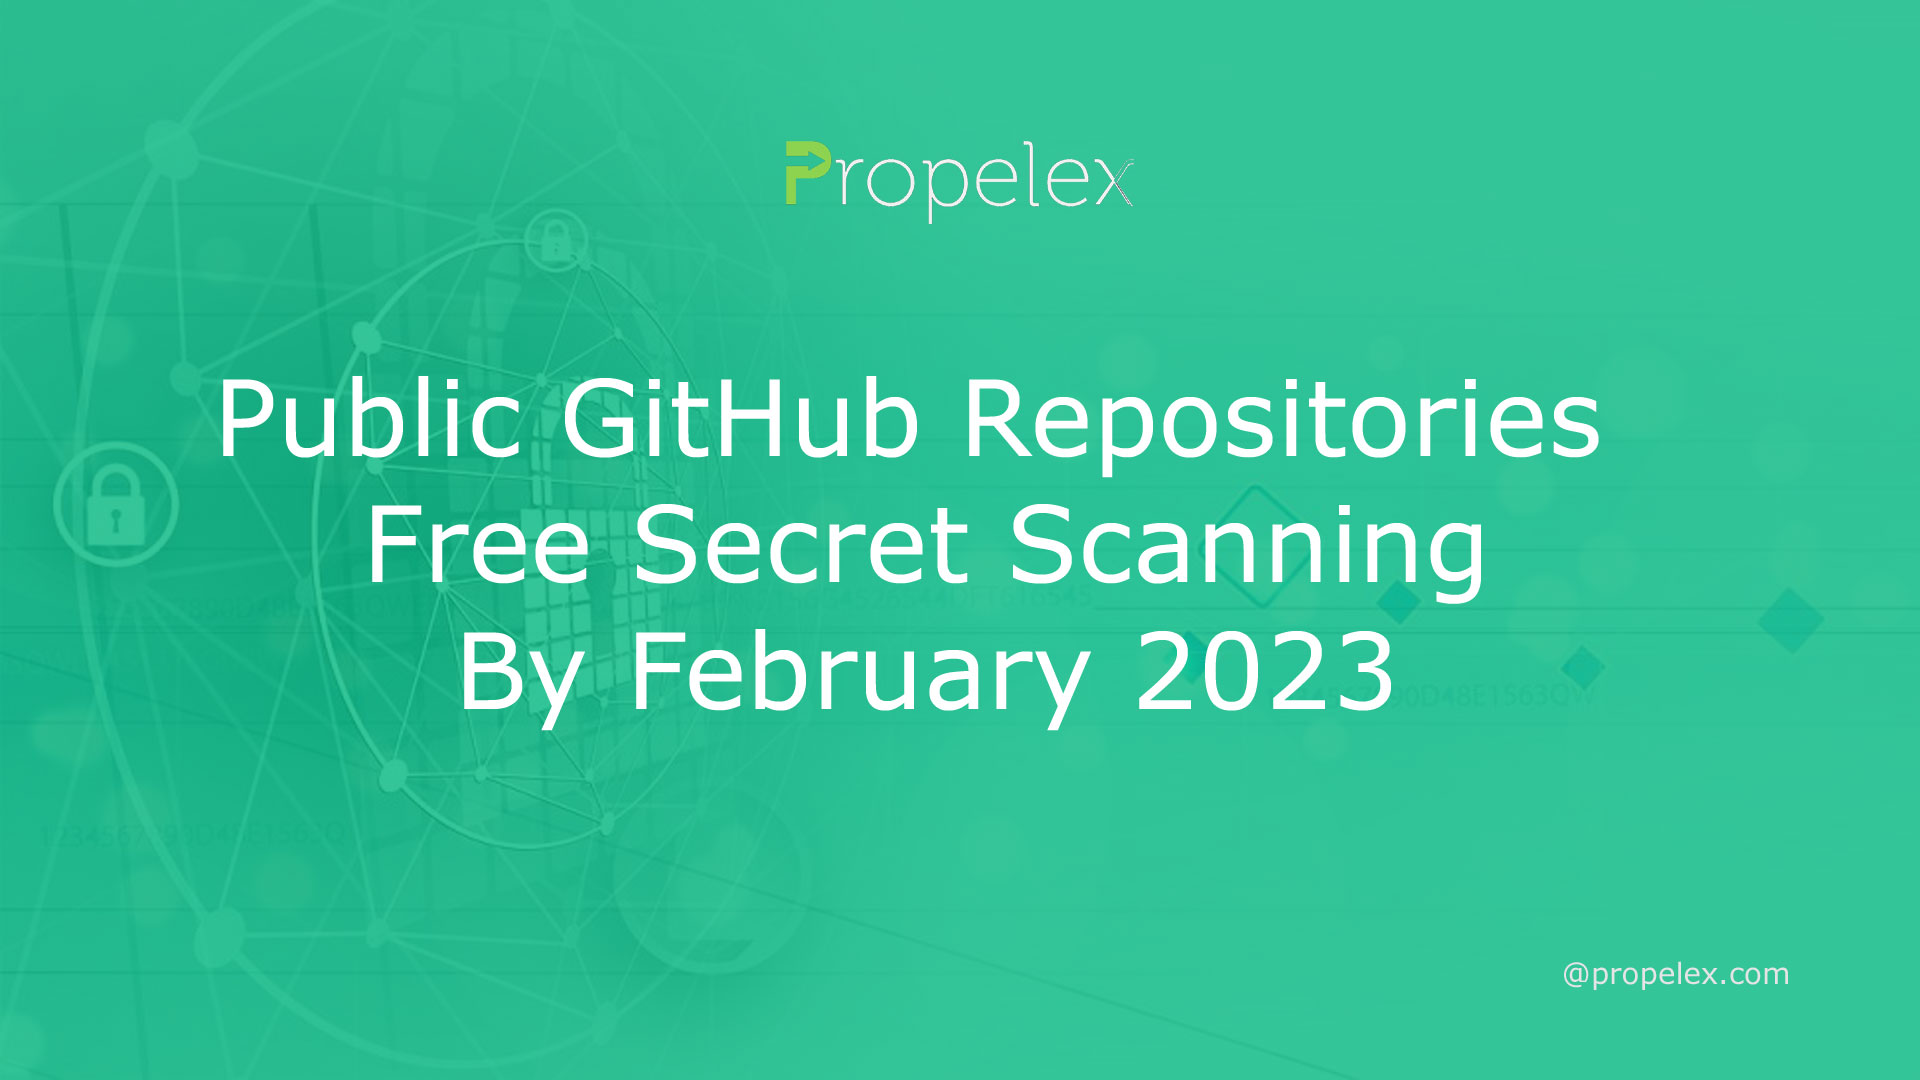 Public GitHub Repositories Free Secret Scanning By February 2023